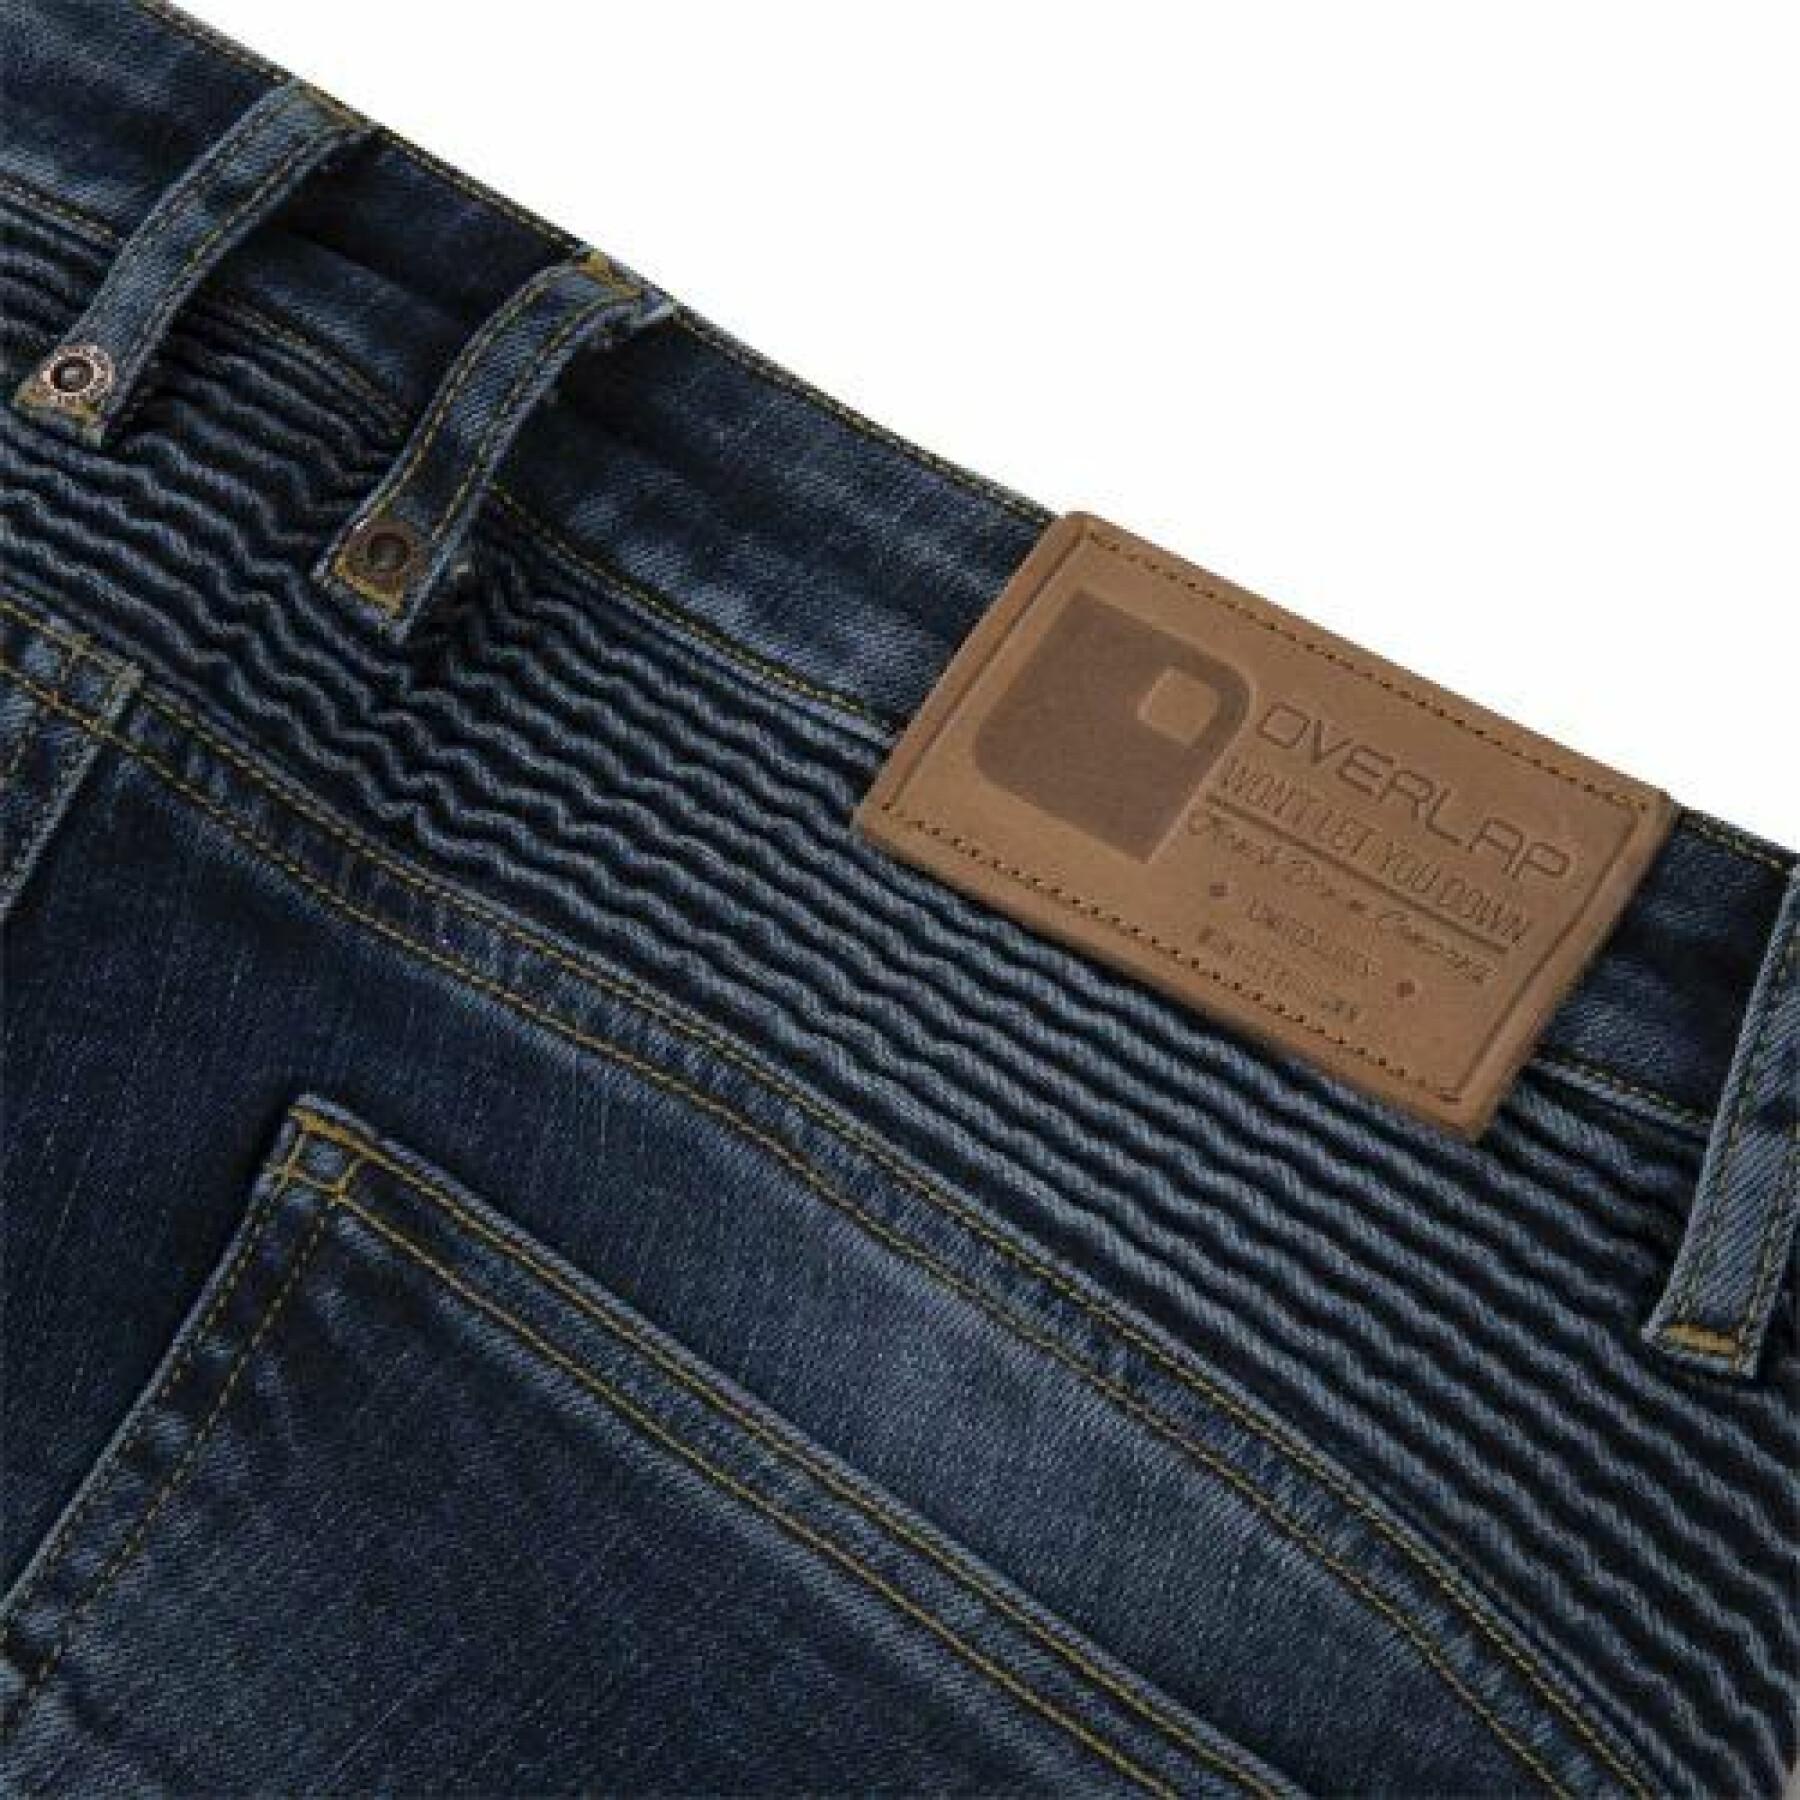 Motorcycle jeans woman Overlap Imola Ce